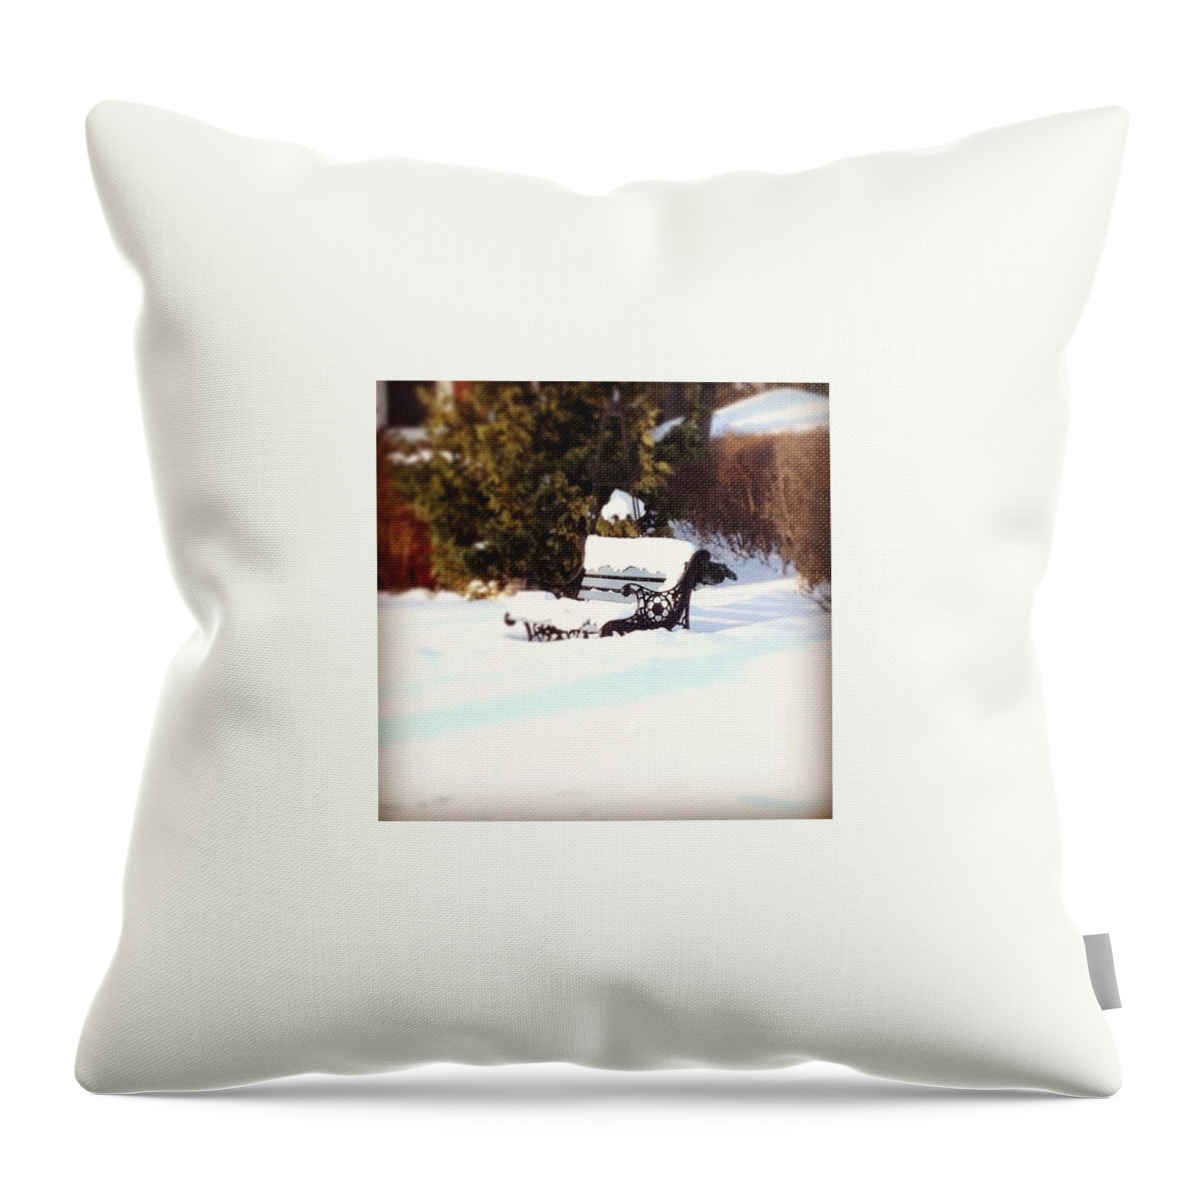  Throw Pillow featuring the photograph Frozen Bench by Frank J Casella